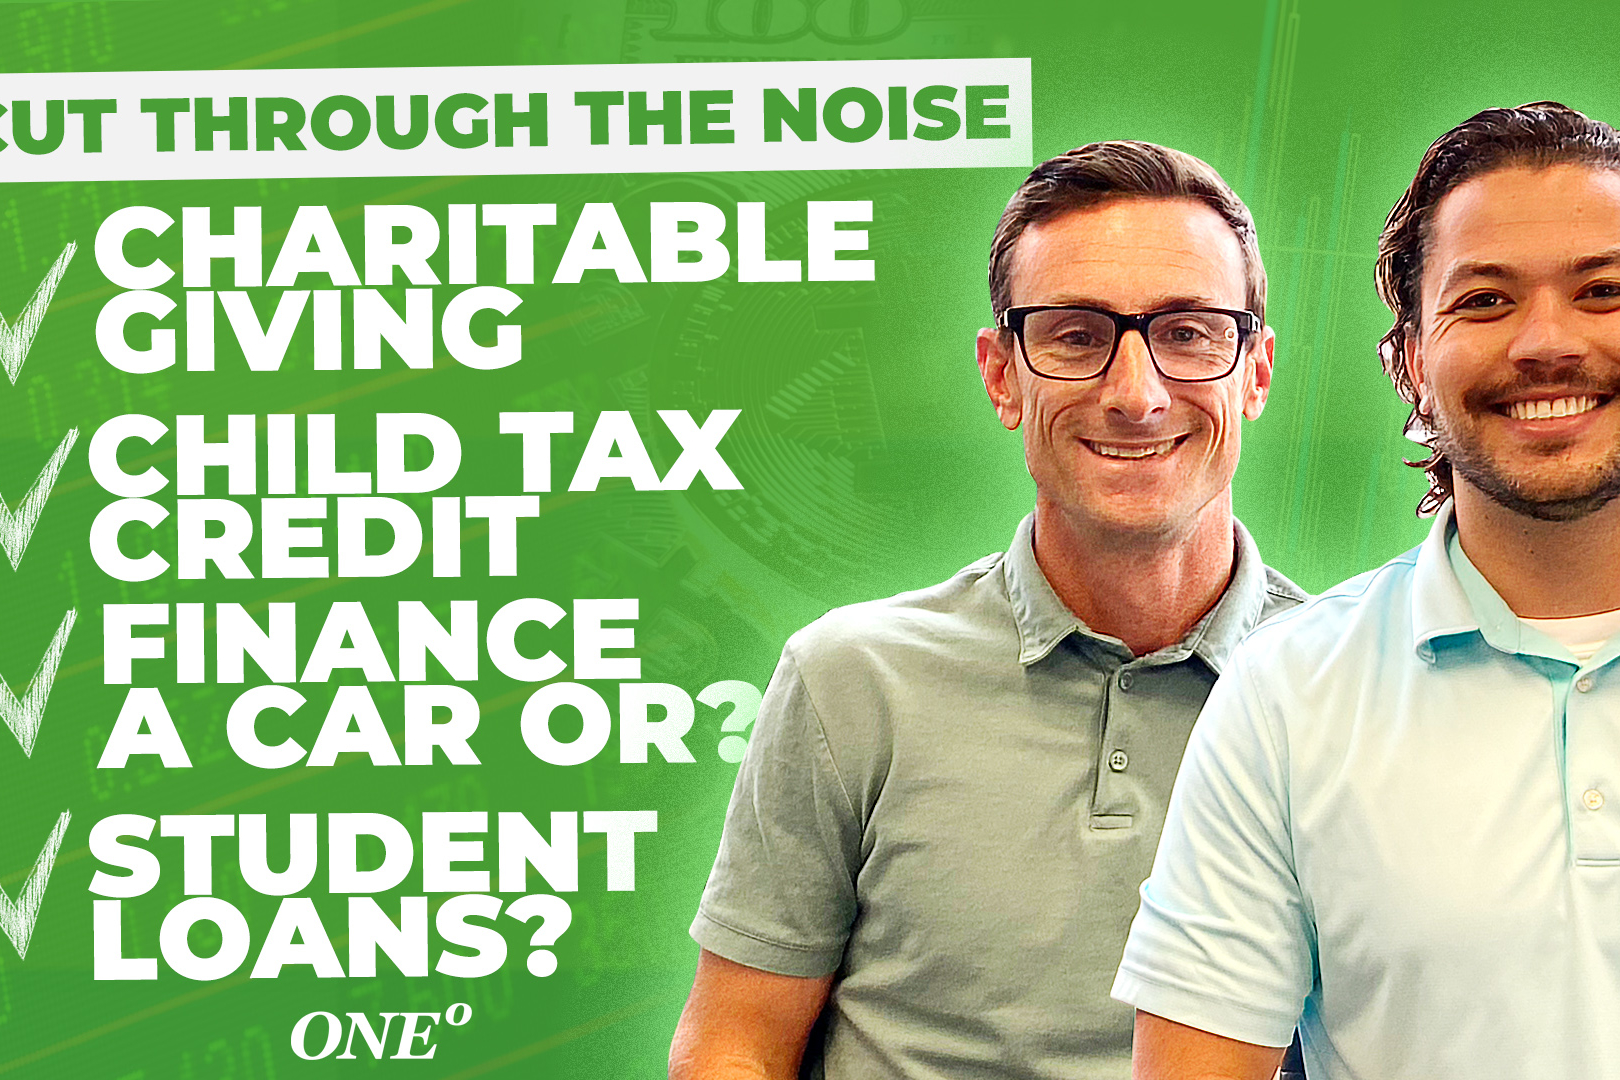 What should I do with Child Tax Credits? Will there be student loan forgiveness? & More on Cut Through The Noise